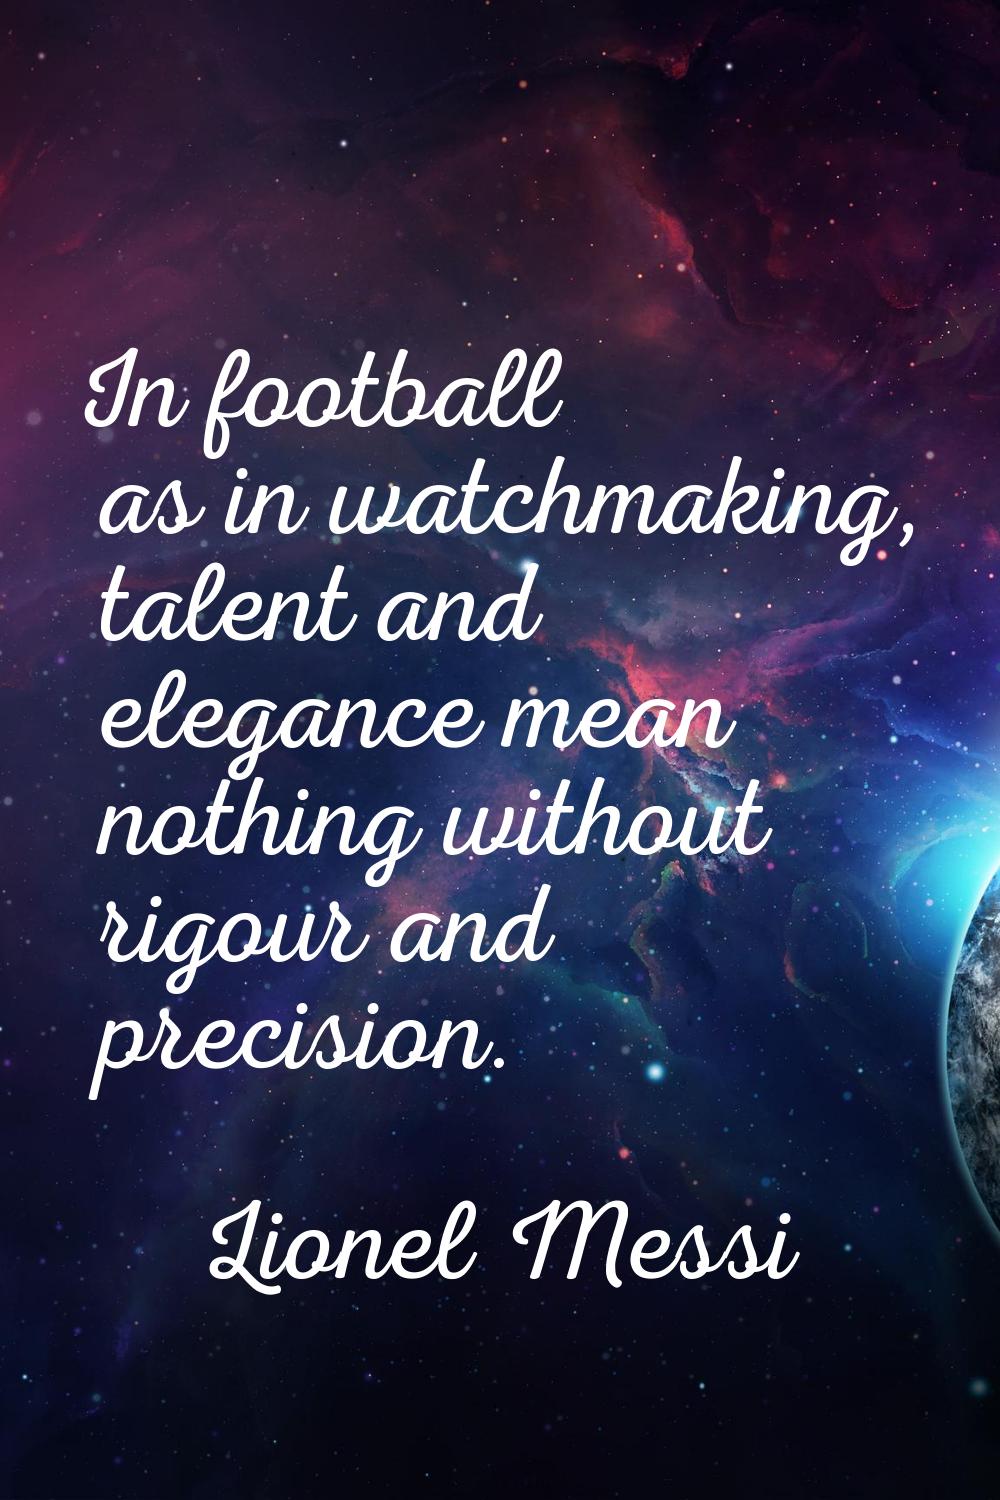 In football as in watchmaking, talent and elegance mean nothing without rigour and precision.